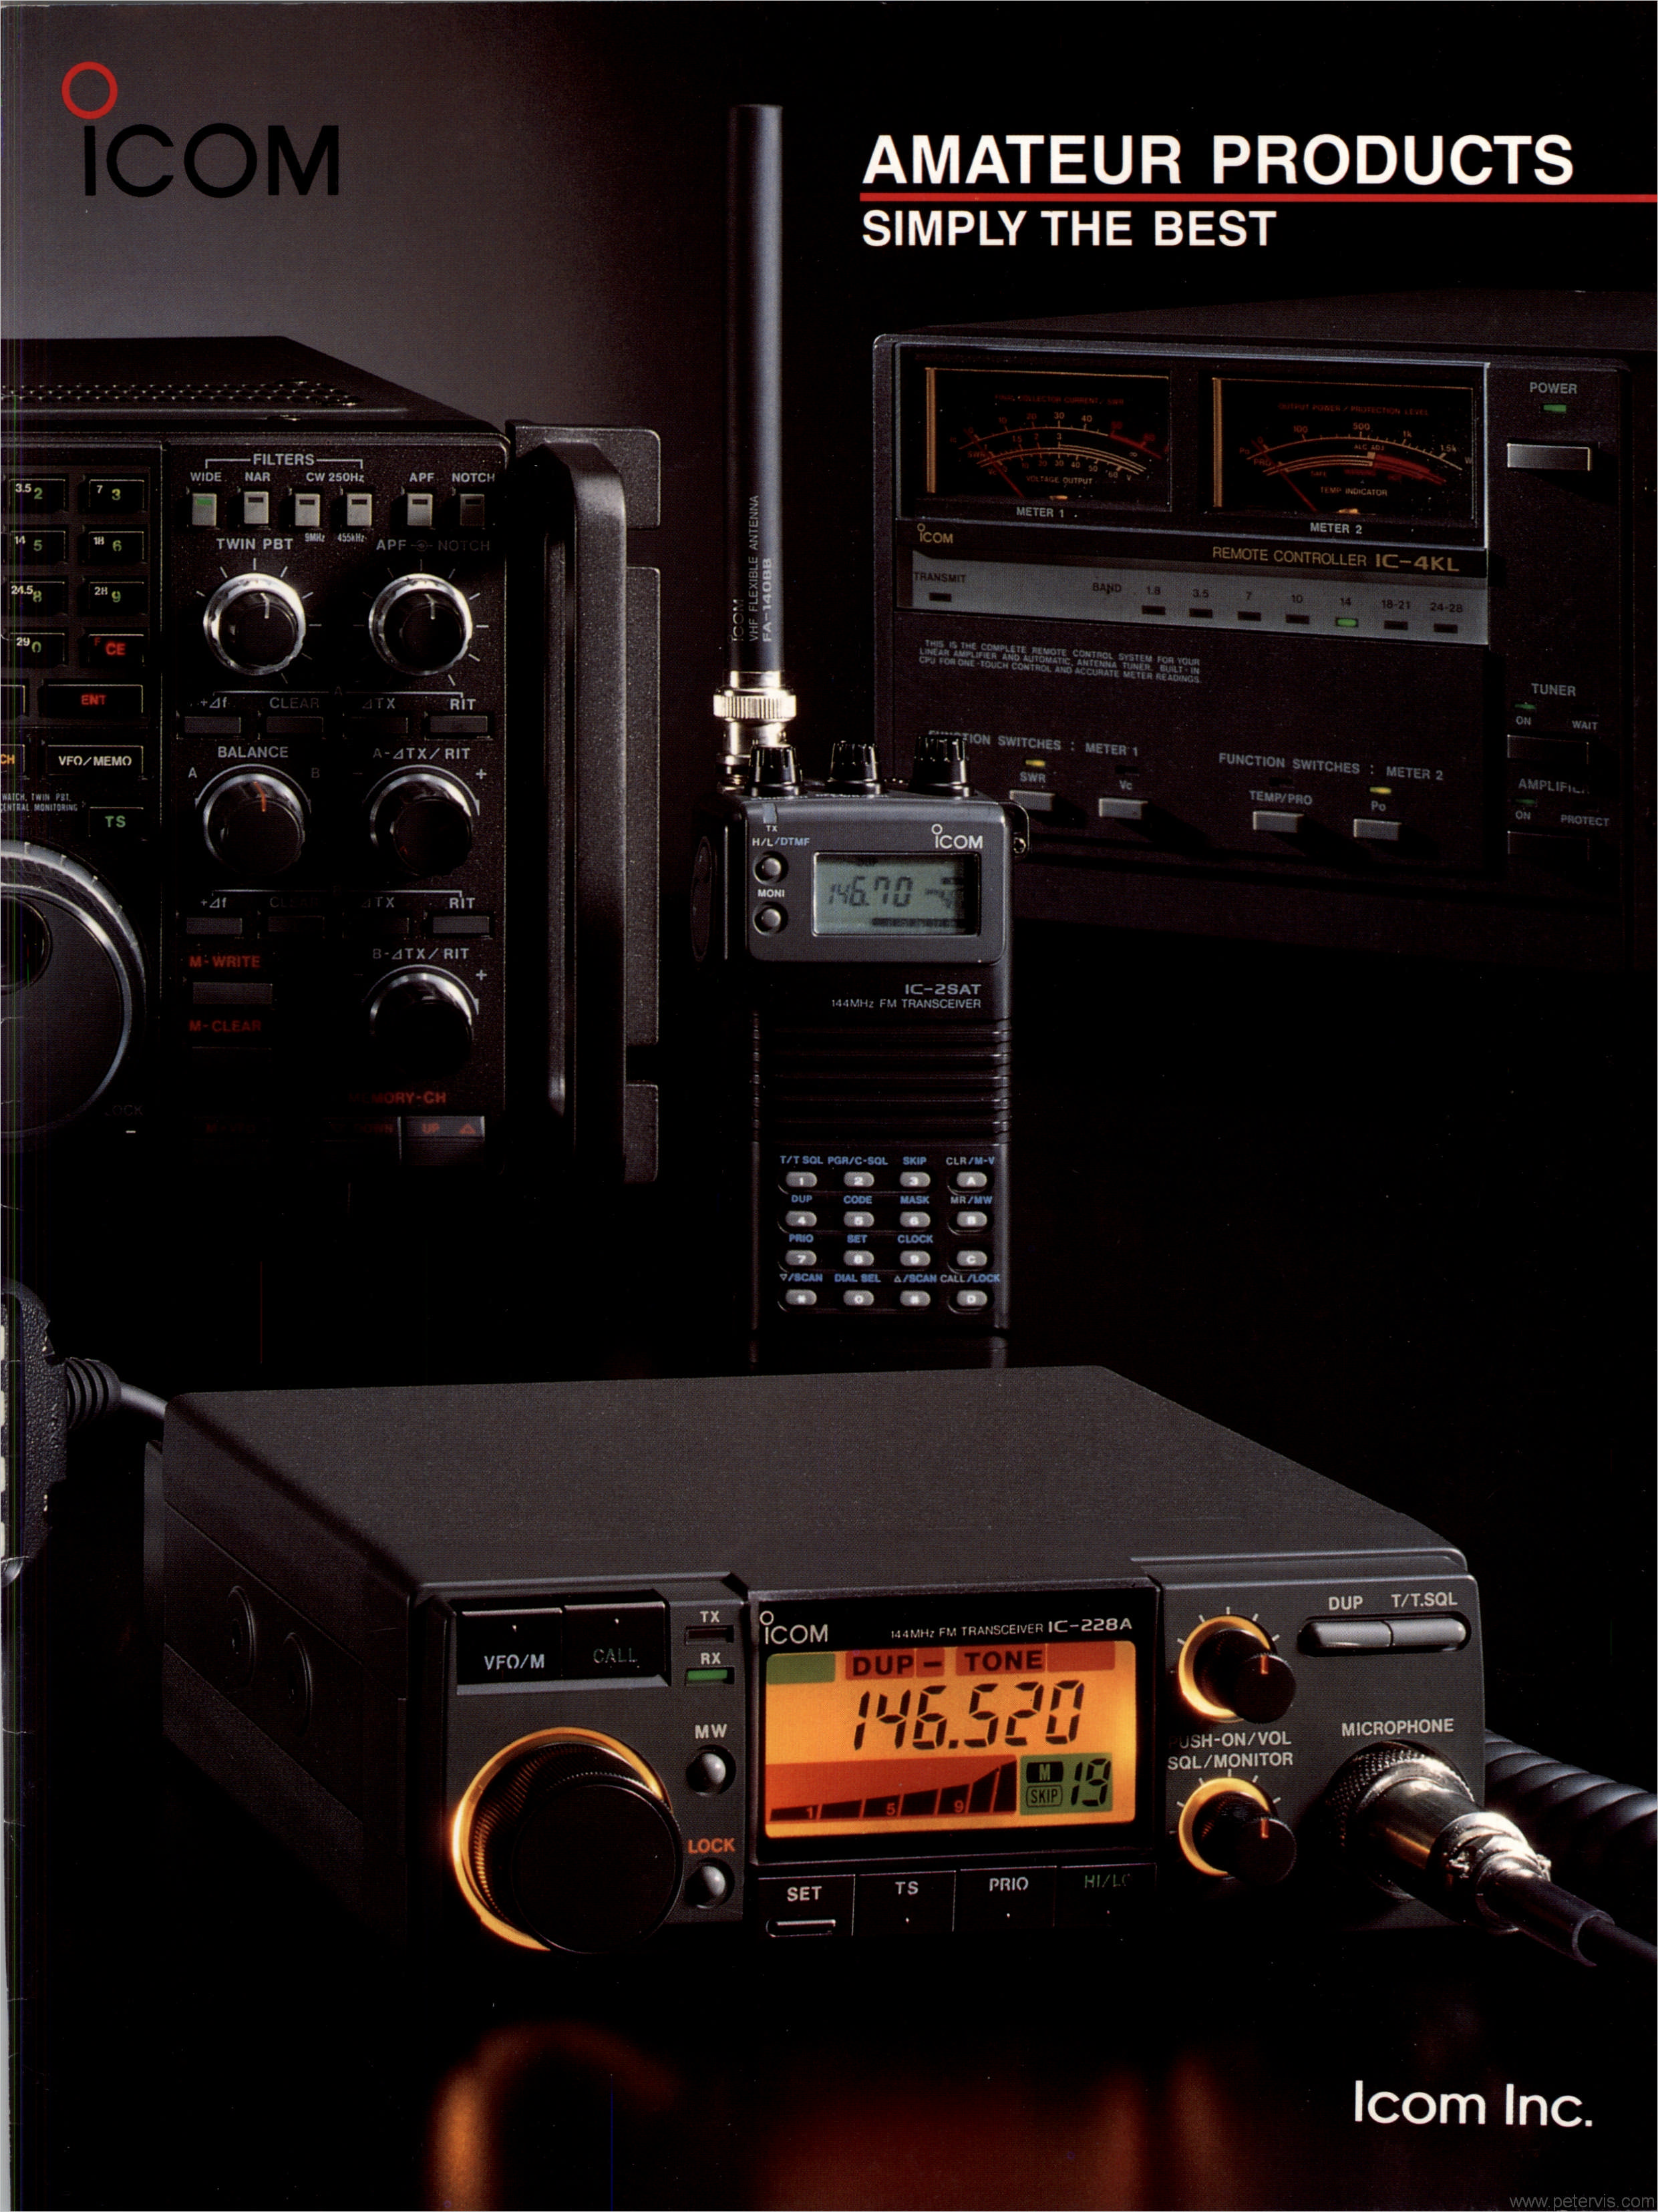 Icom AMATEUR PRODUCTS SIMPLY THE BEST